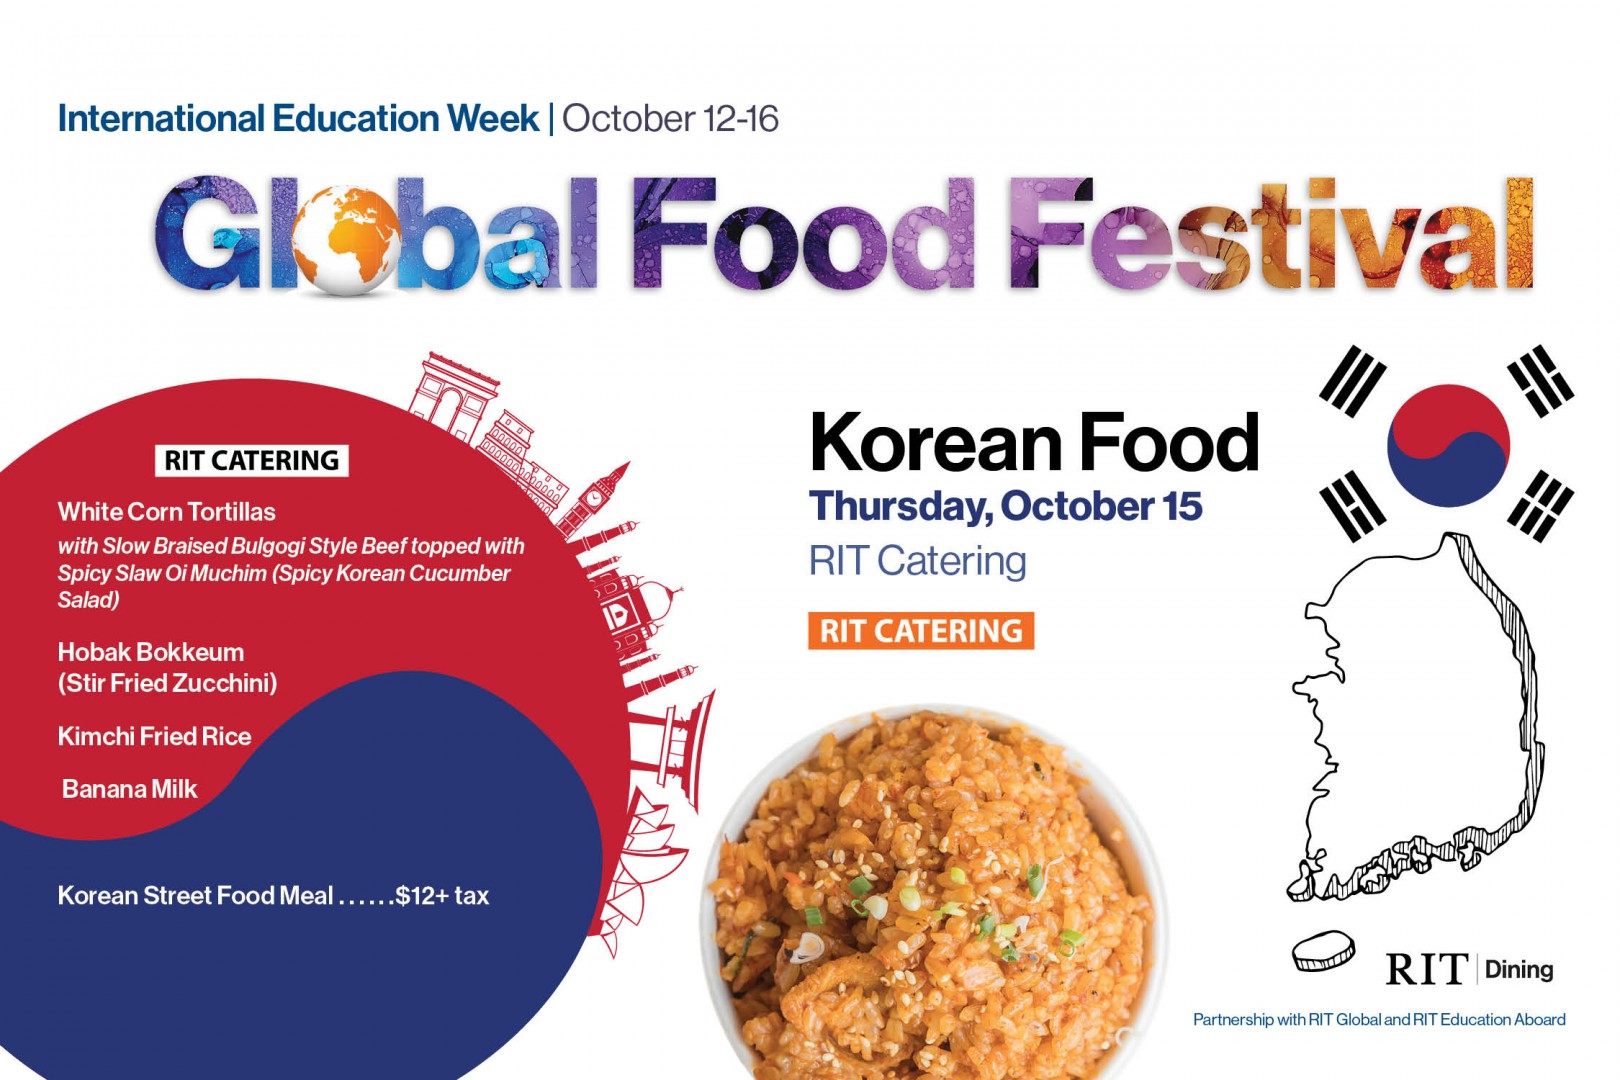 Graphic with text "Global Food Festival", "Korean Food", and outline of country